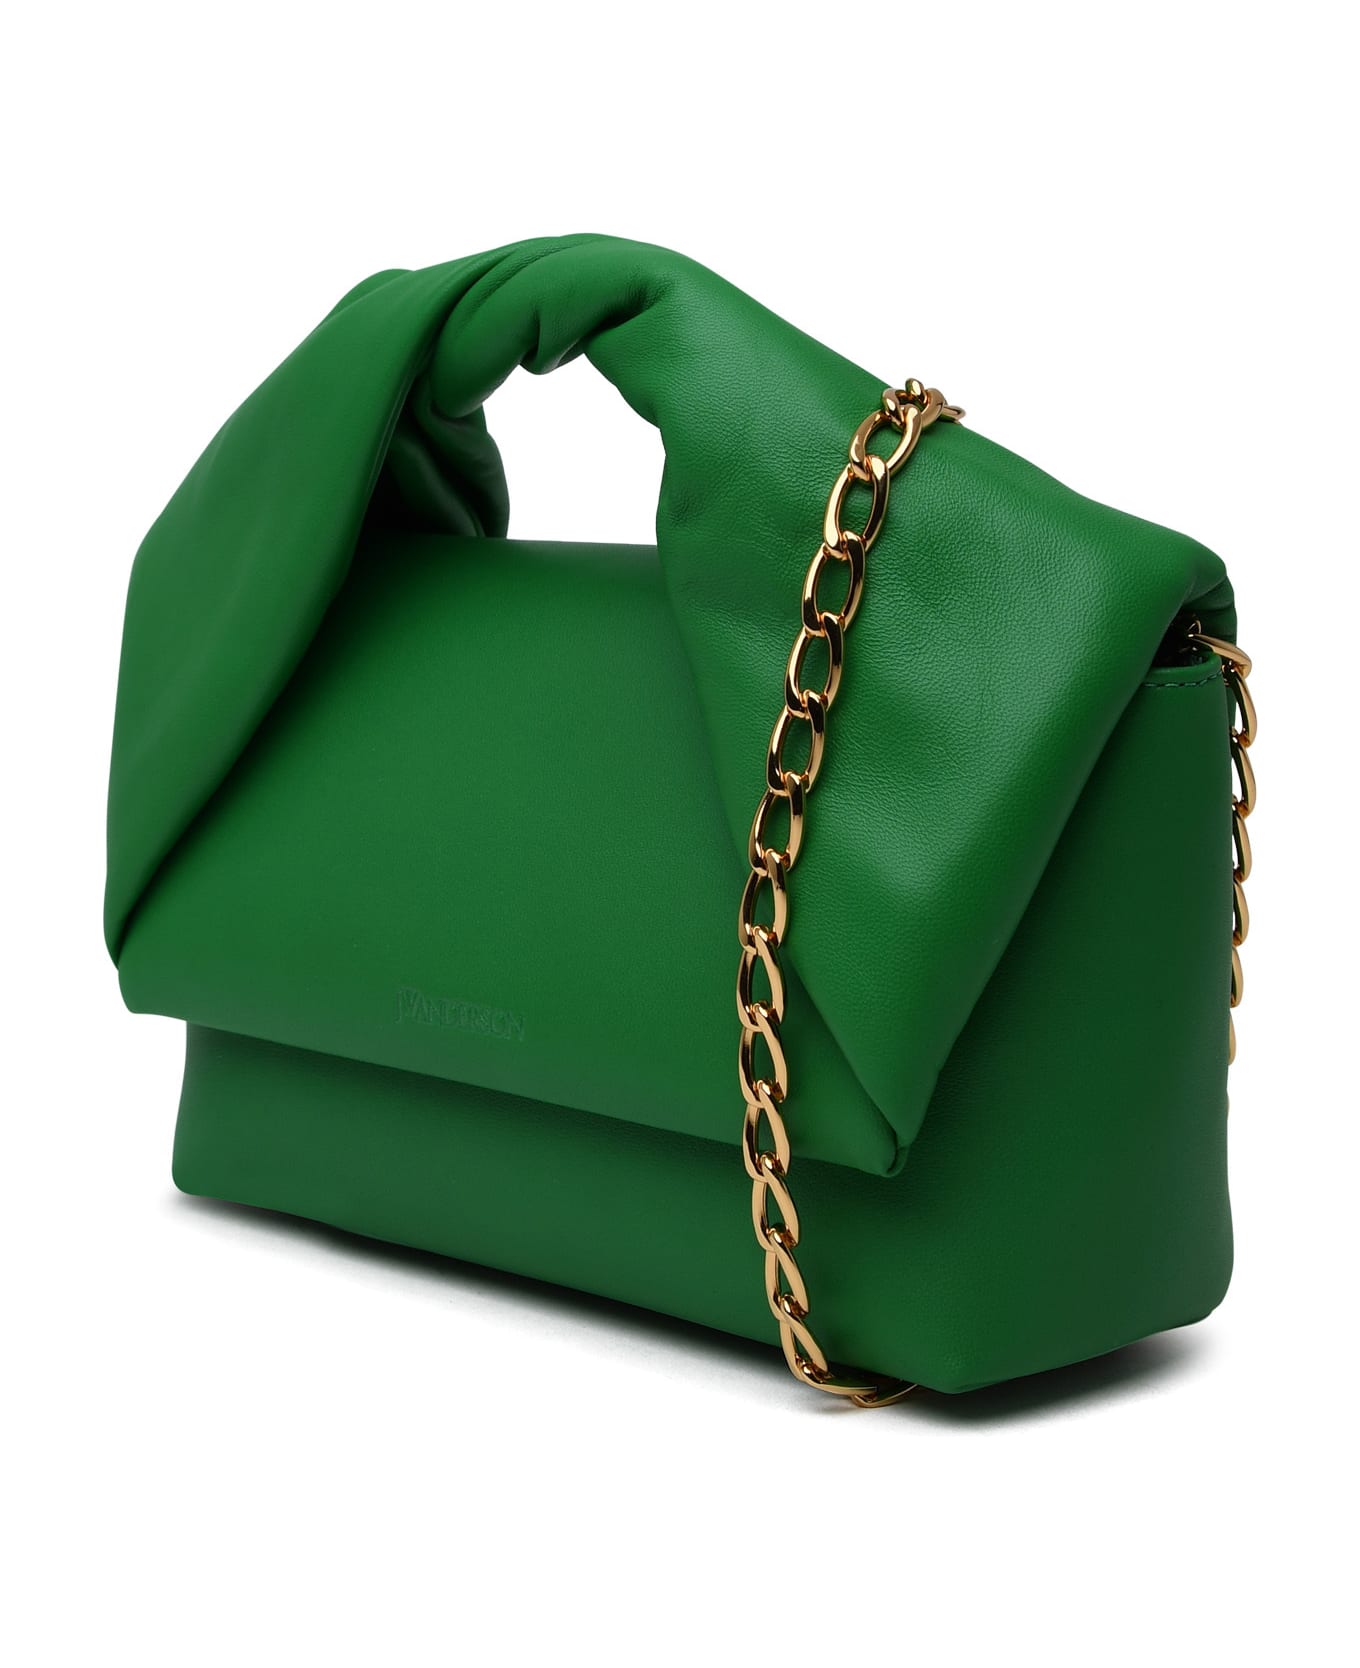 J.W. Anderson Twister Green Leather Bag - BRIGHT GREEN